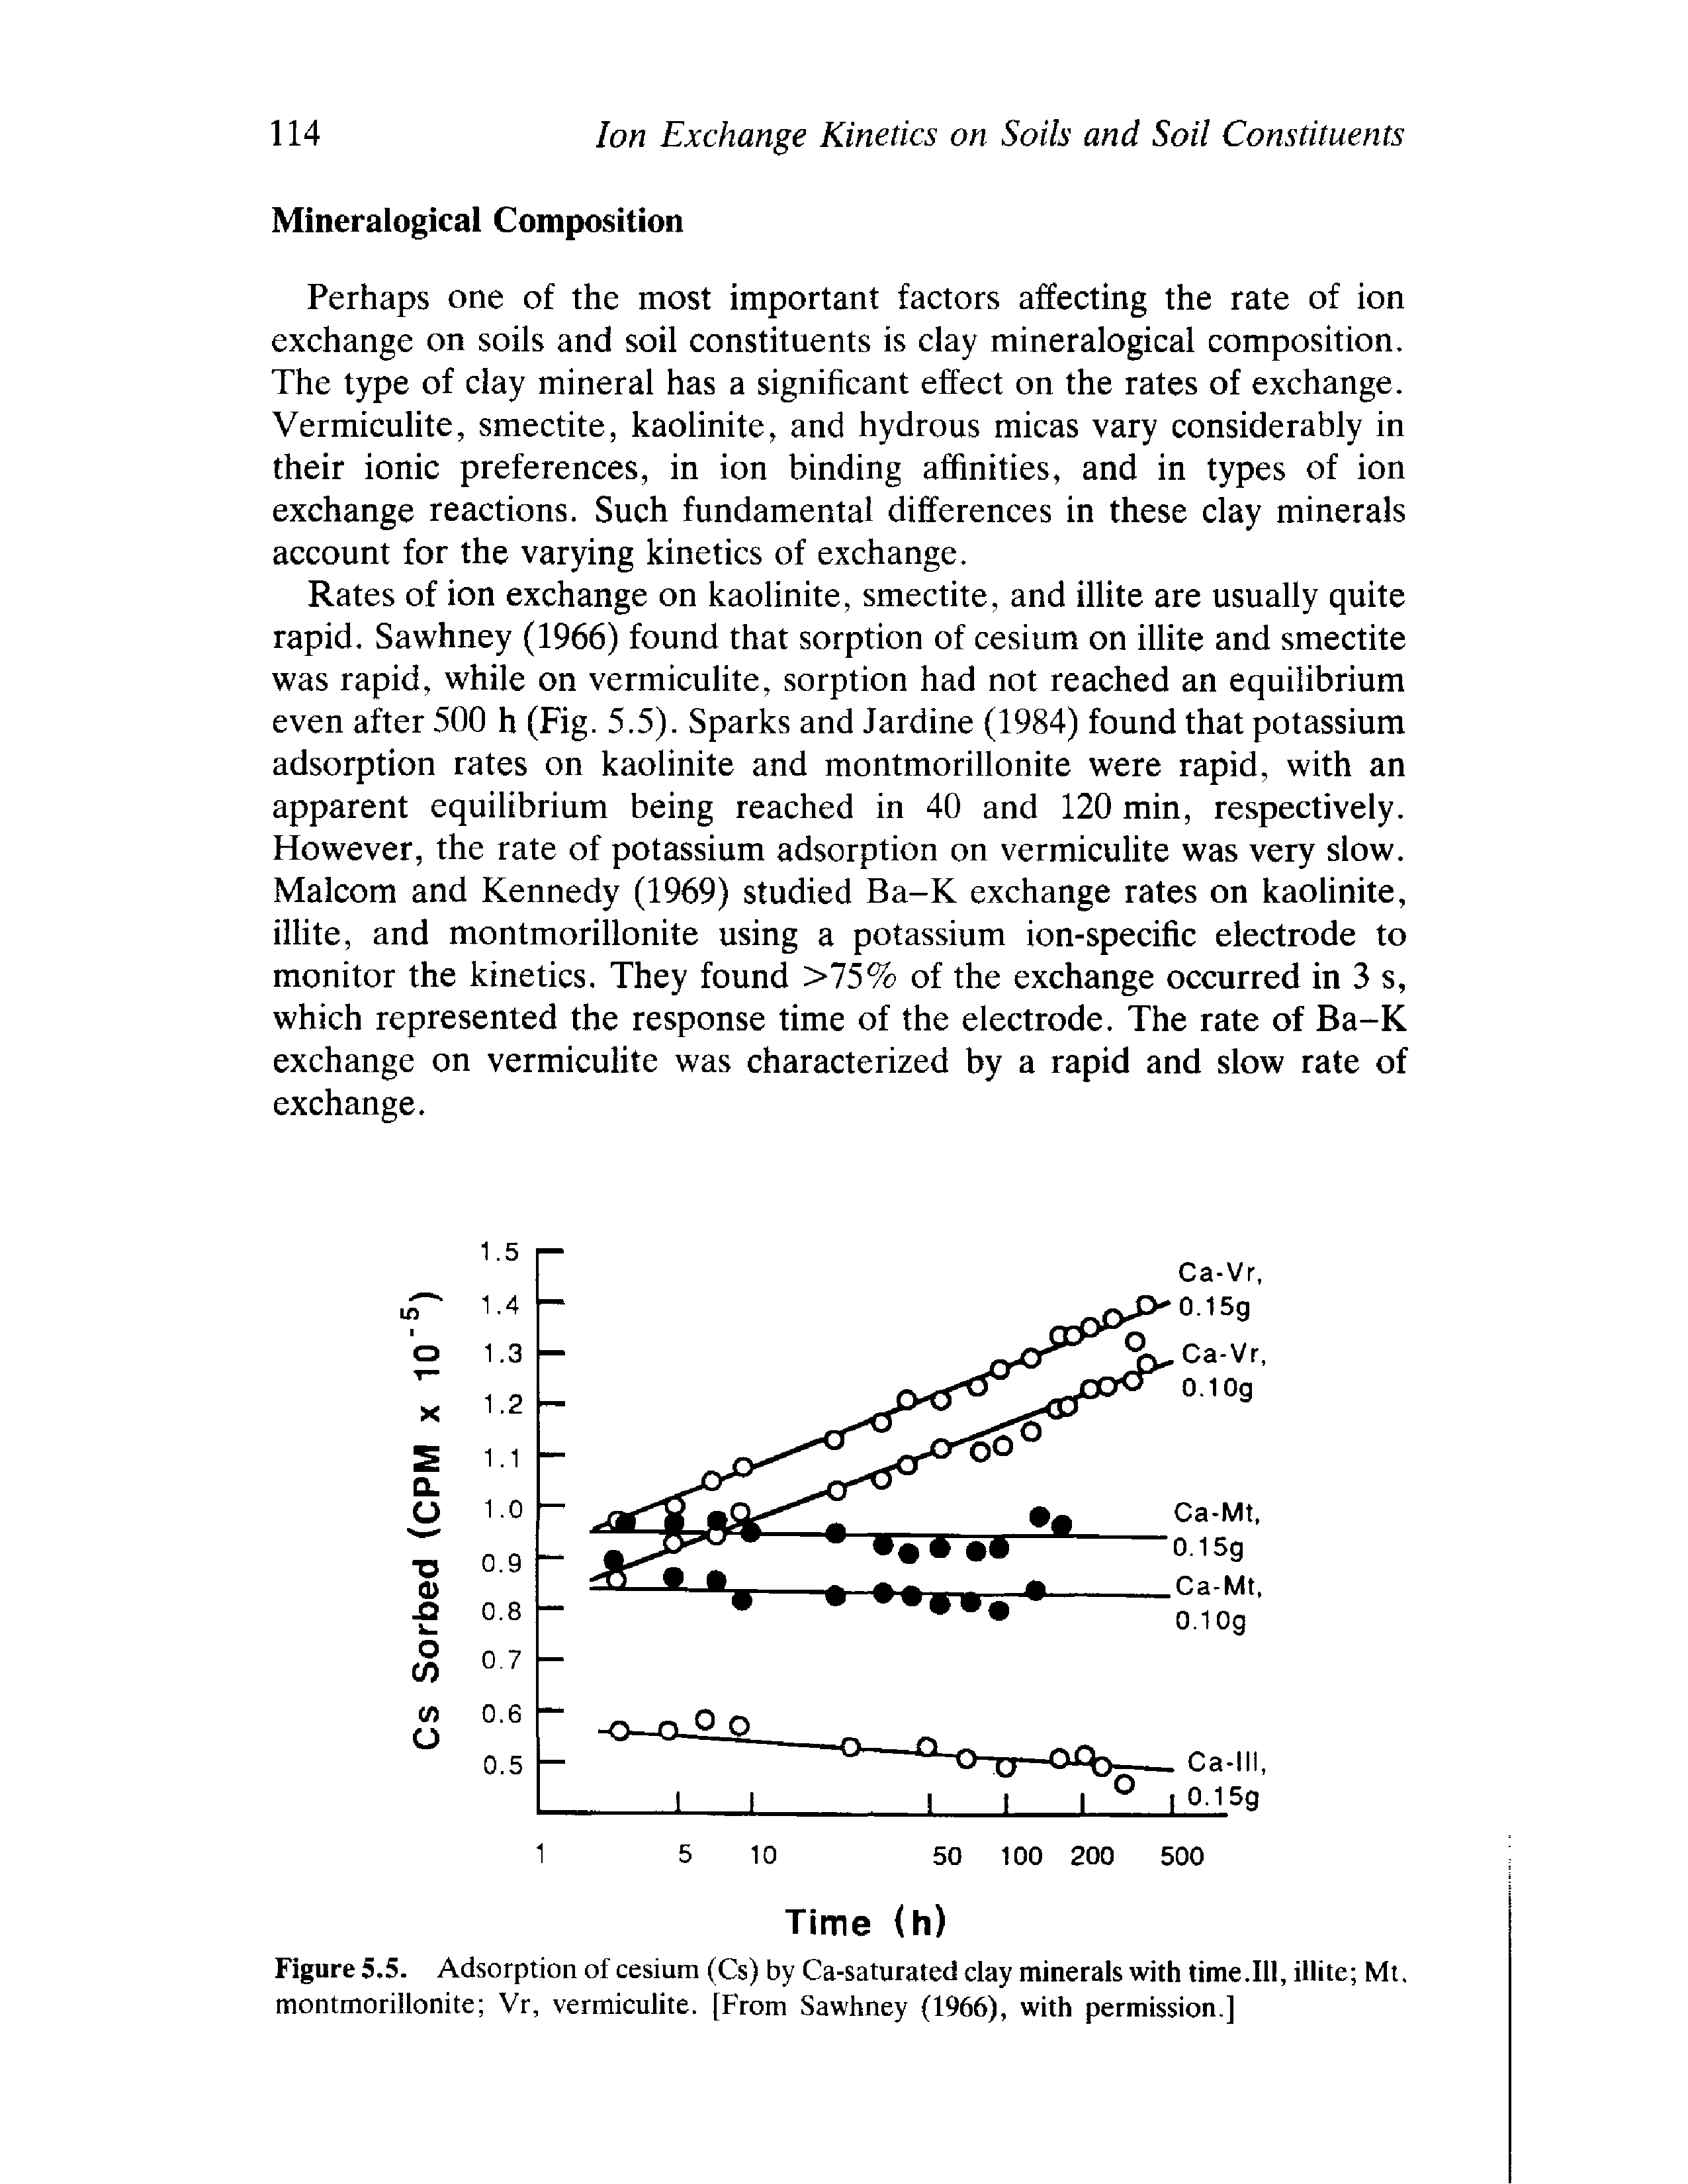 Figure 5.5. Adsorption of cesium (Cs) by Ca-saturated clay minerals with time.Ill, illite Mt. montmorillonite Vr, vermiculite. [From Sawhney (1966), with permission.]...